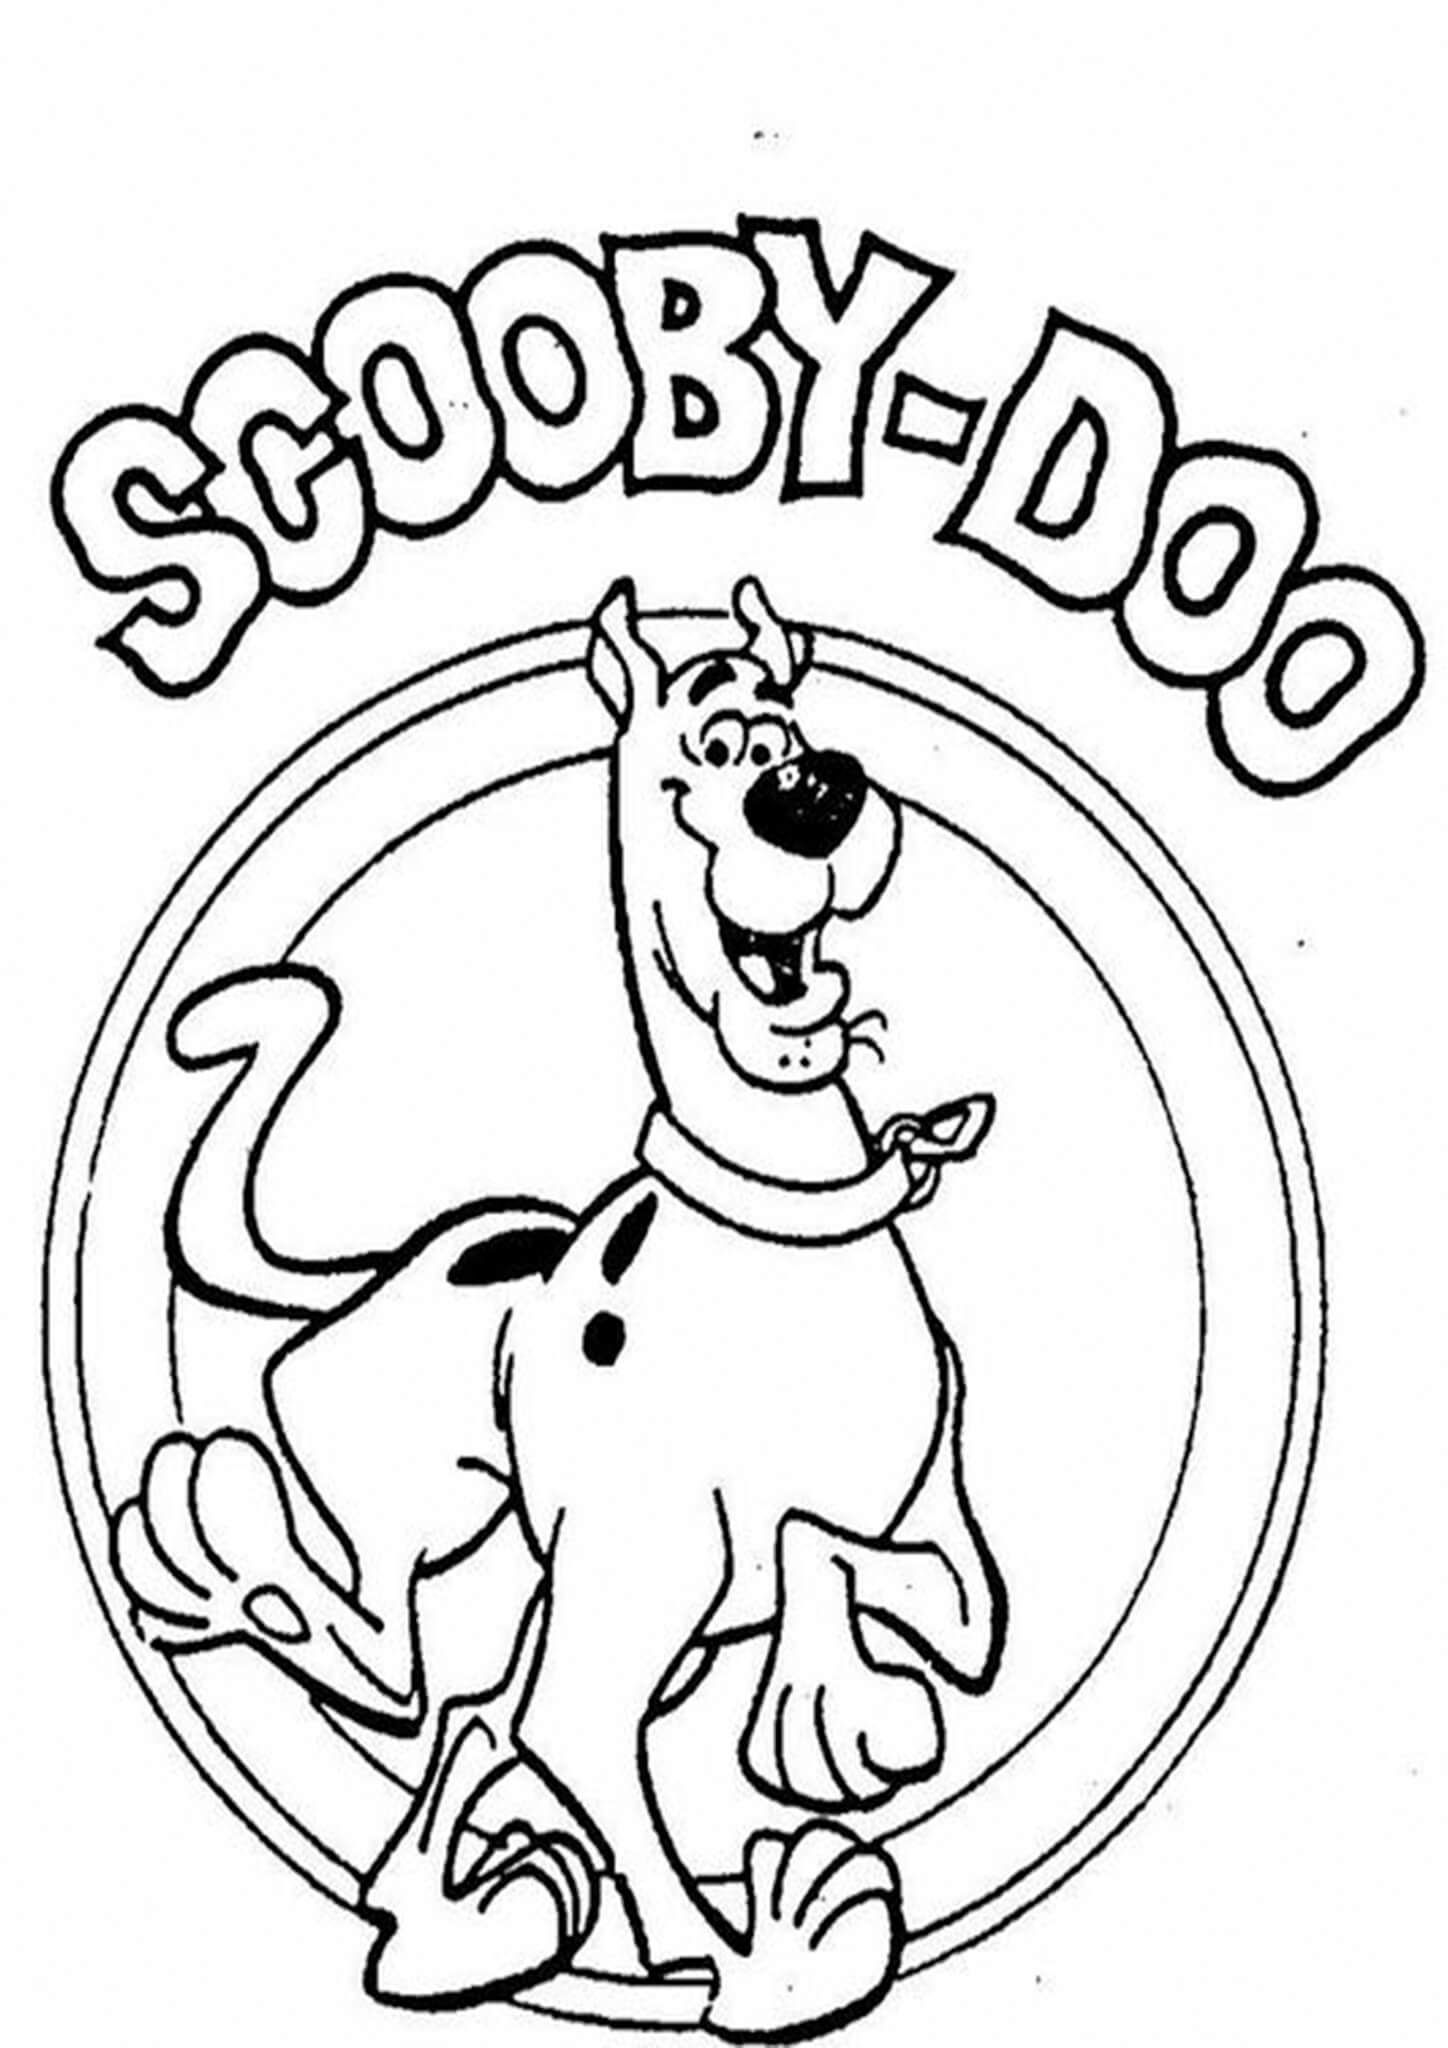 nice-baby-scooby-doo-coloring-page-scooby-doo-coloring-pages-cartoon-coloring-pages-monster